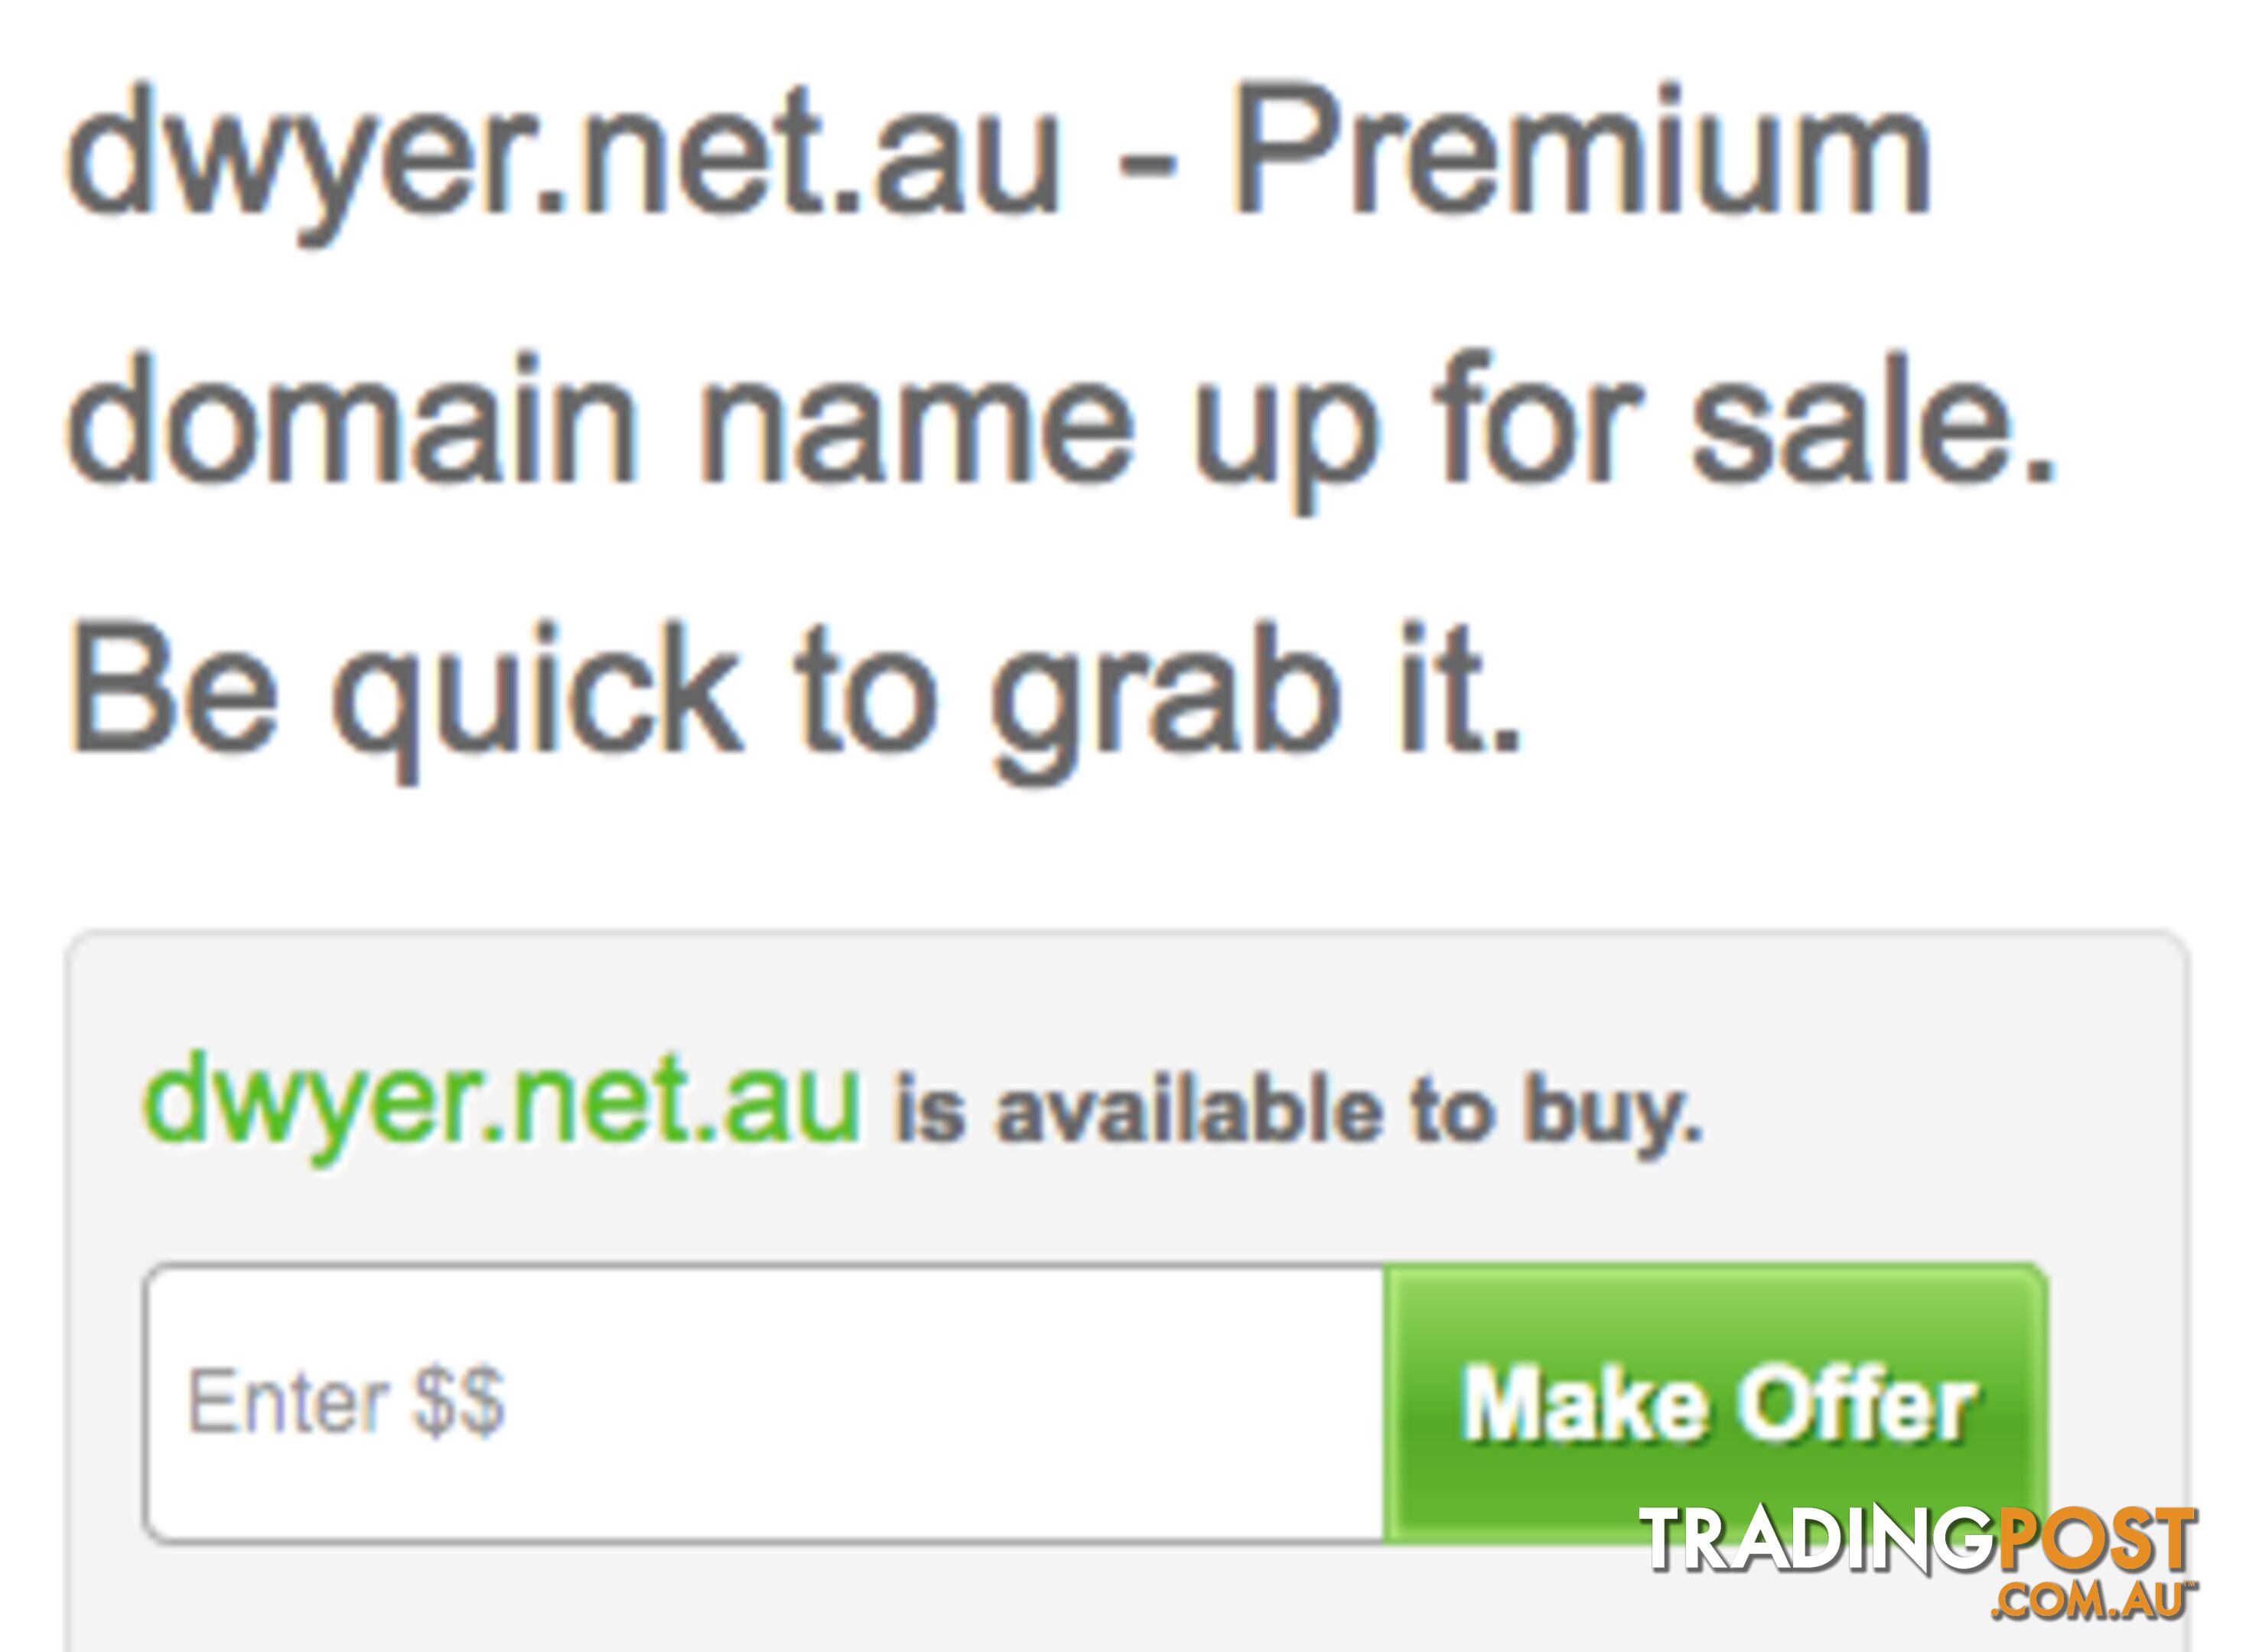 Dwyer.net.au - Premium domain name up for sale.